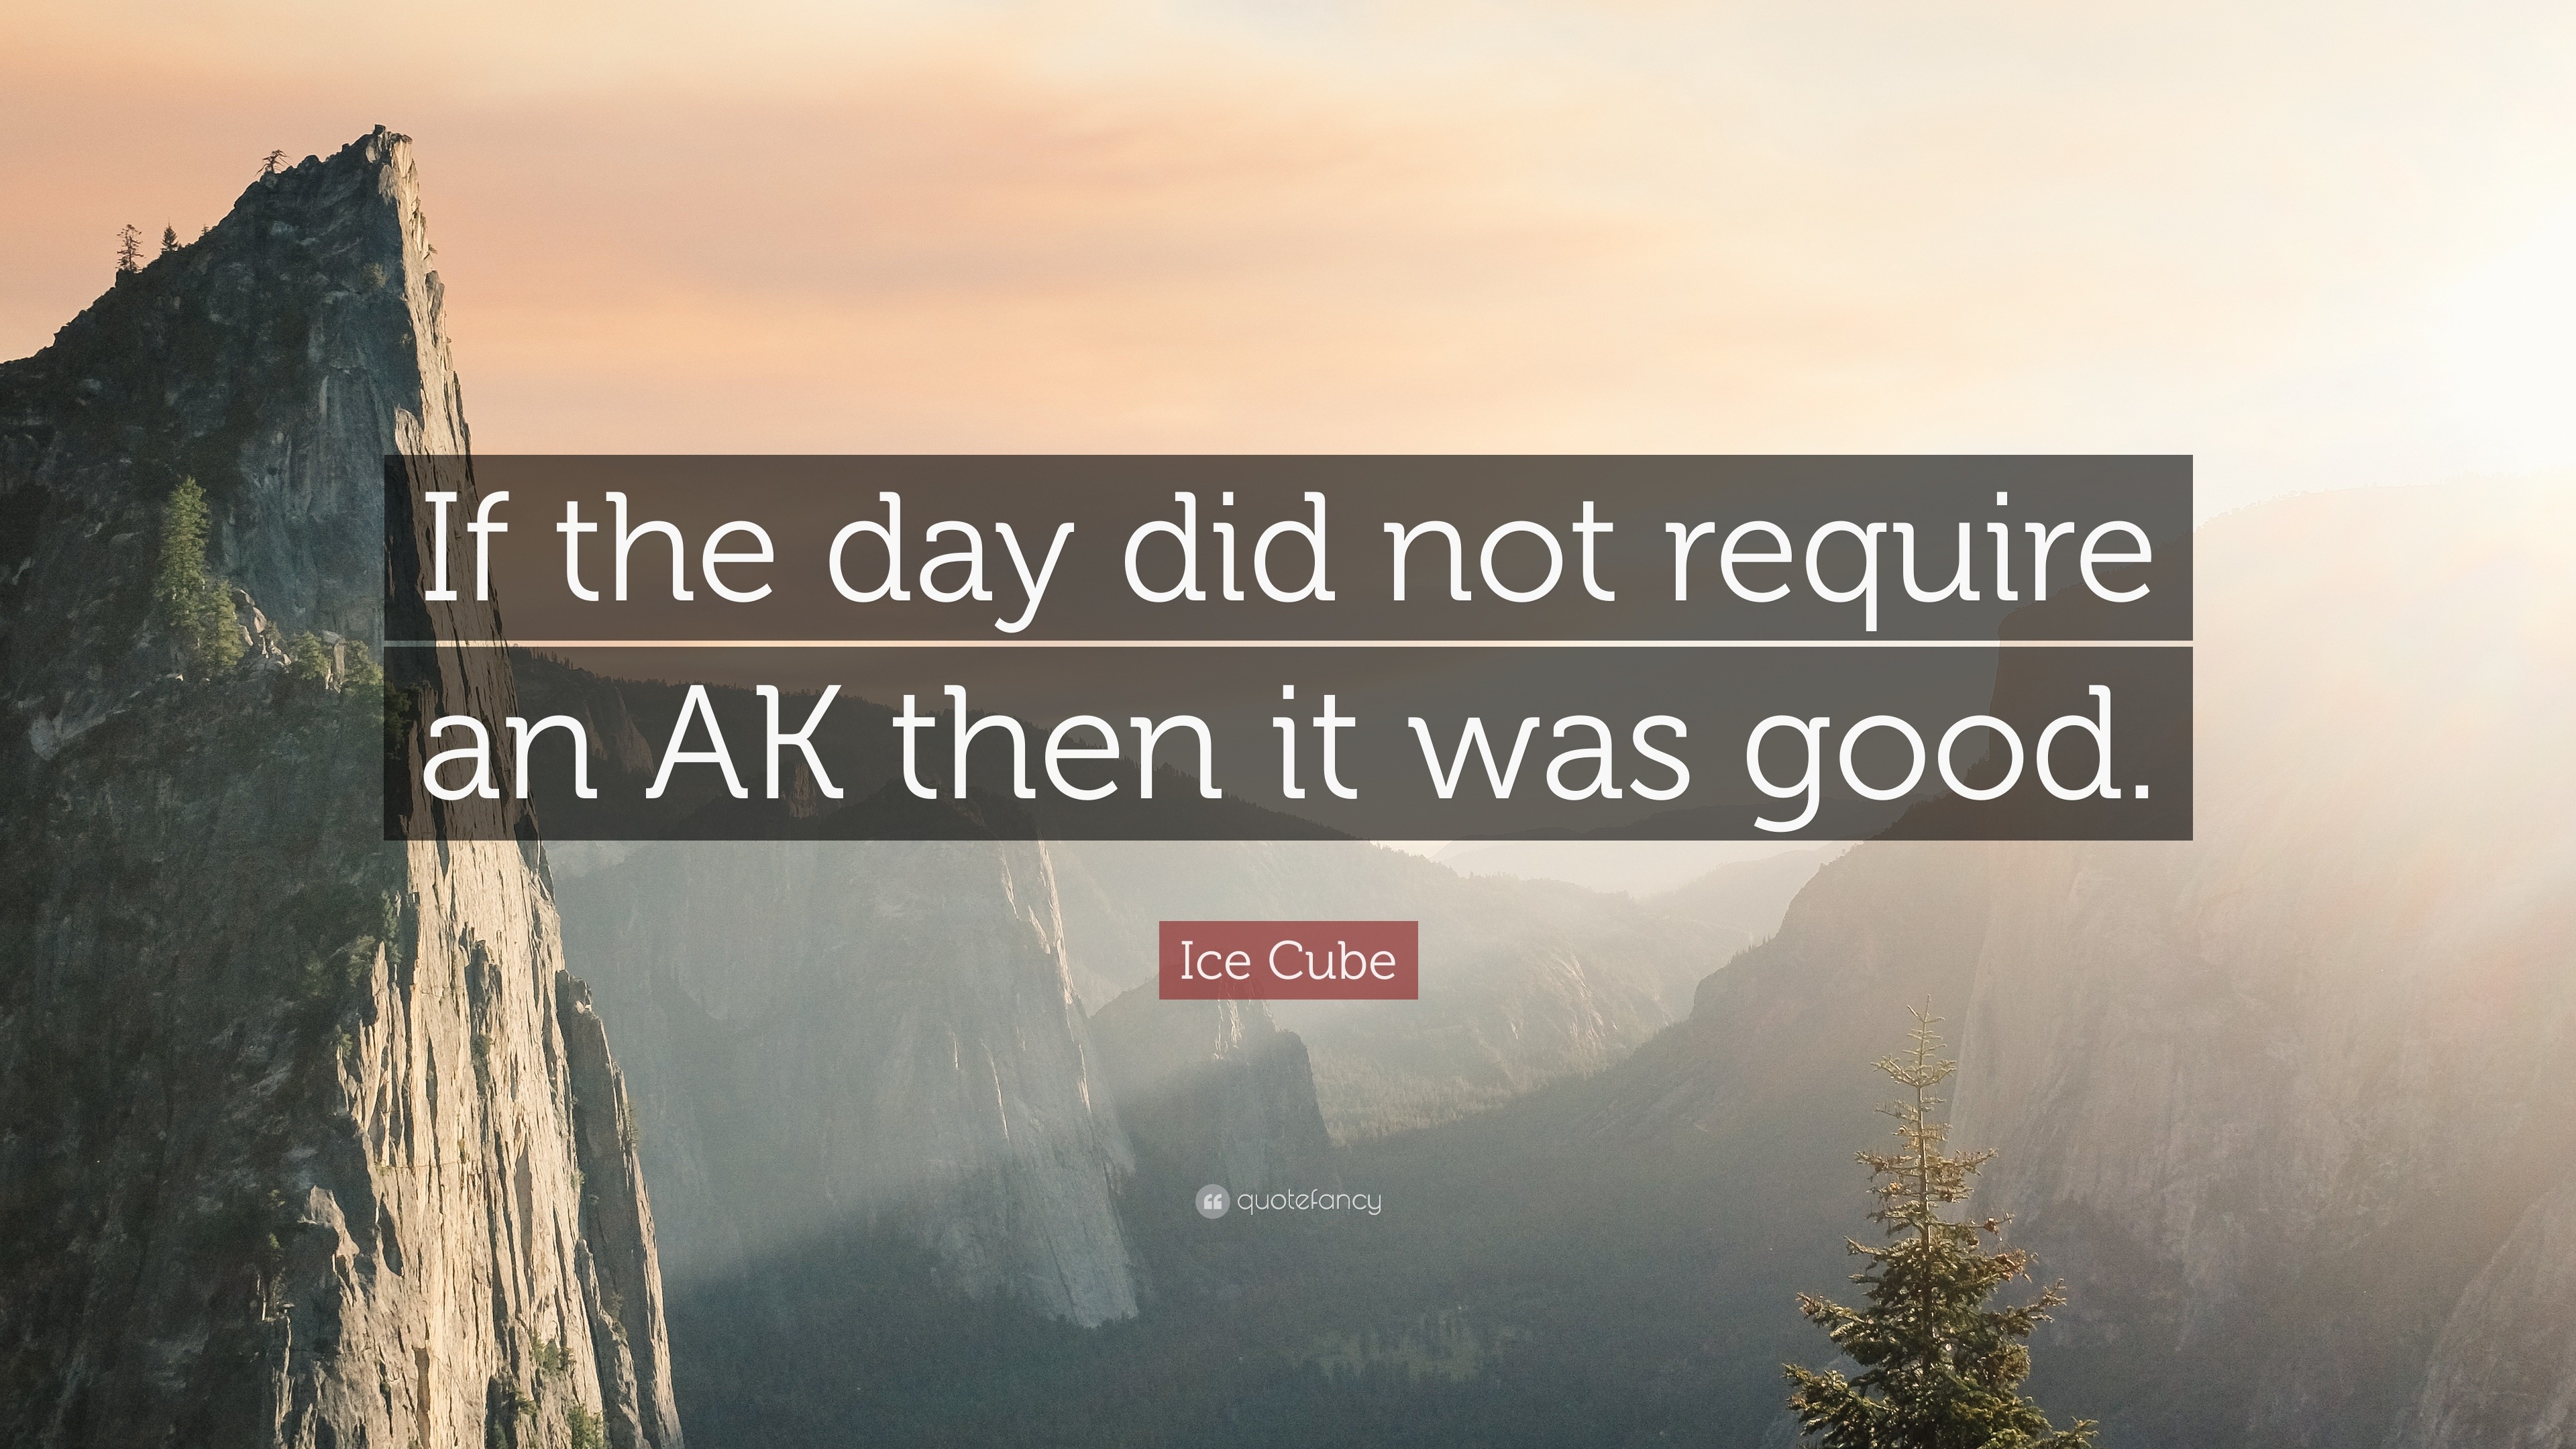 Ice Cube Quote: “If the day did not require an AK then it was good.”